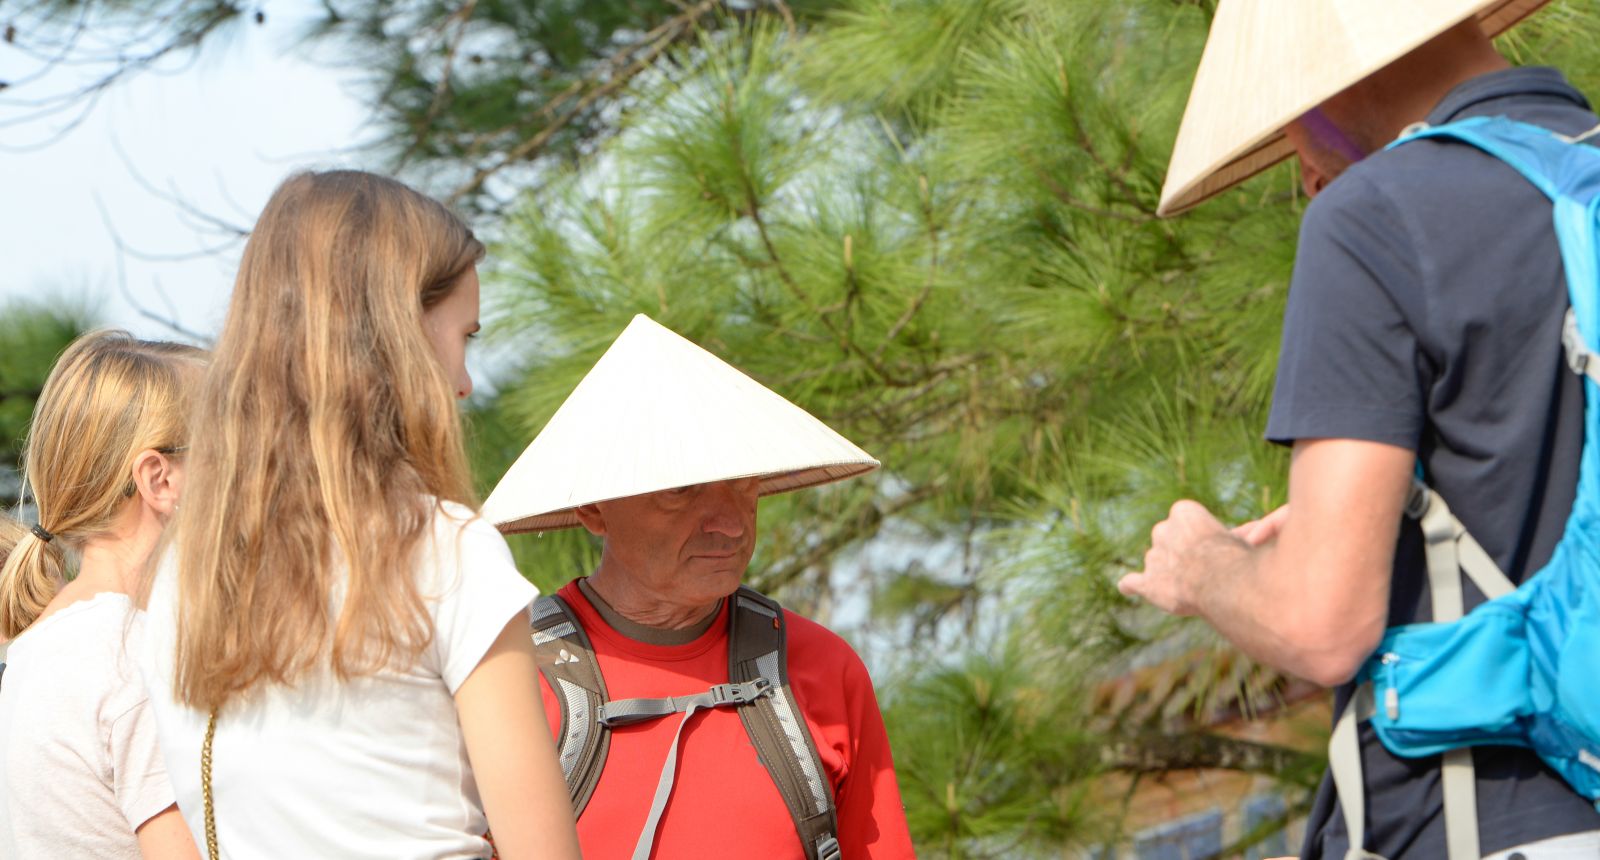 All of the tourists coming to Hue want to wear the “non bai tho” (conical hat with poem shrouded in its leaves) of Hue